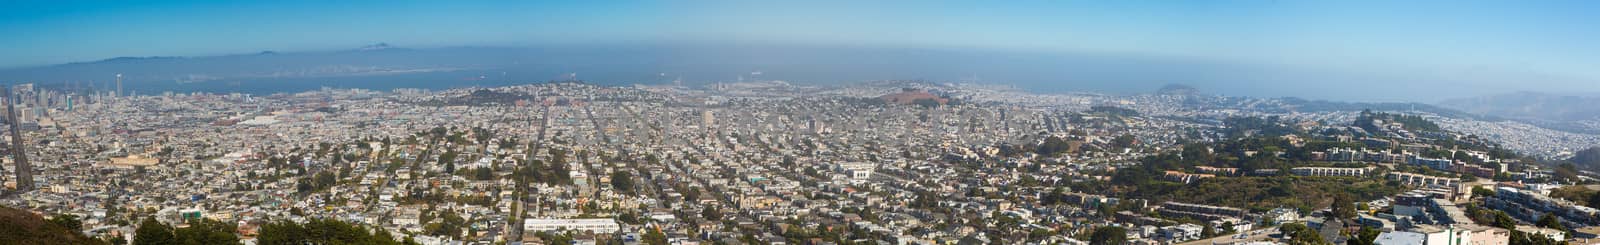 San Francisco, panoramic view of the entire city